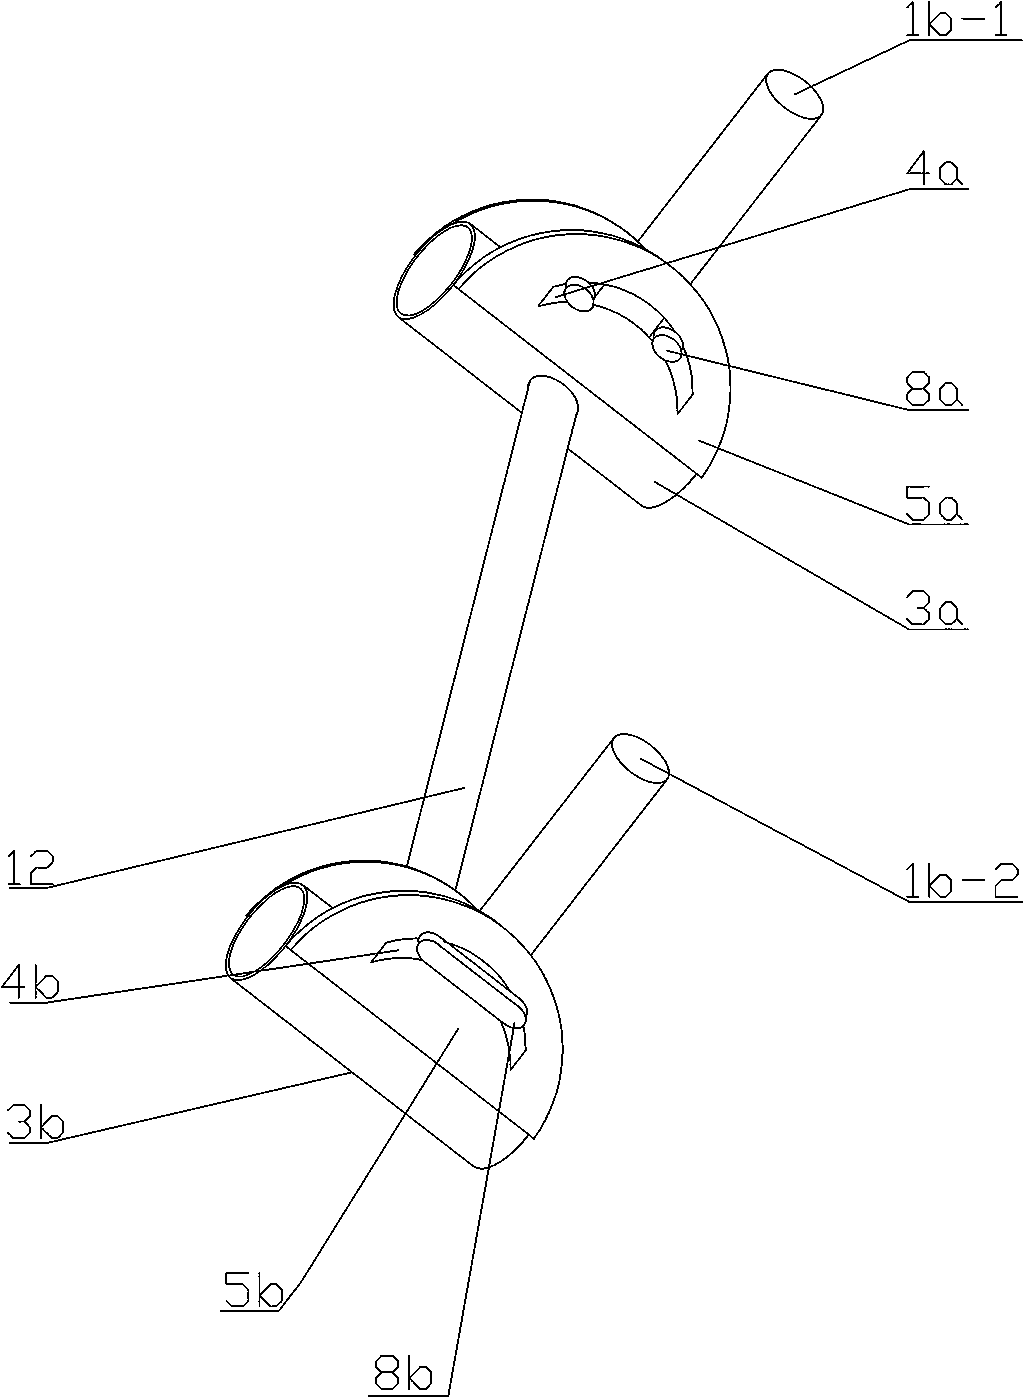 Multi-angle assembling type reinforcement structure